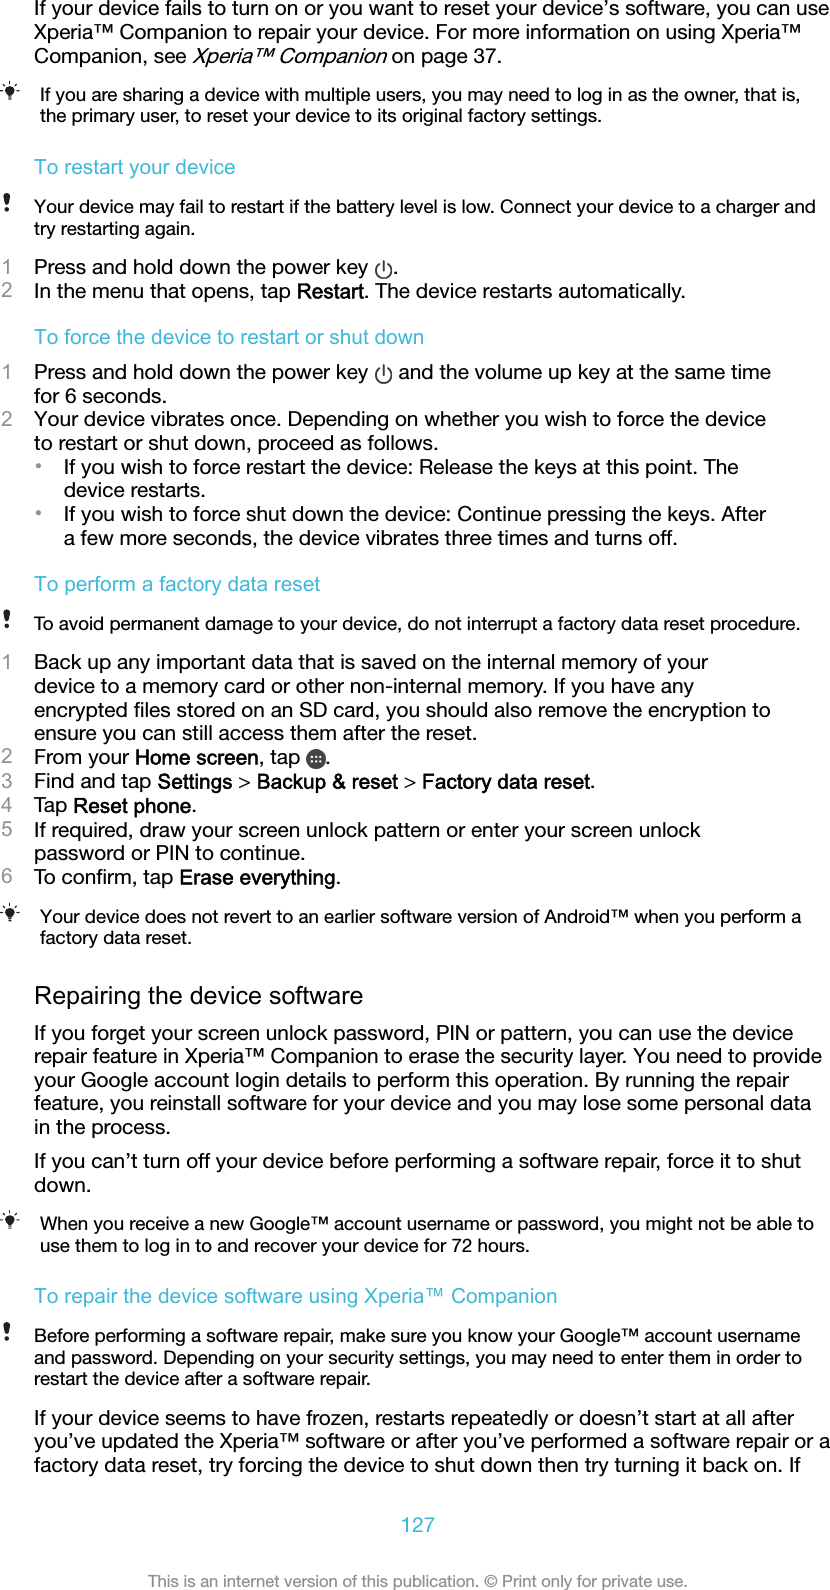 If your device fails to turn on or you want to reset your device’s software, you can useXperia™ Companion to repair your device. For more information on using Xperia™Companion, see Xperia™ Companion on page 37.If you are sharing a device with multiple users, you may need to log in as the owner, that is,the primary user, to reset your device to its original factory settings.To restart your deviceYour device may fail to restart if the battery level is low. Connect your device to a charger andtry restarting again.1Press and hold down the power key  .2In the menu that opens, tap Restart. The device restarts automatically.To force the device to restart or shut down1Press and hold down the power key   and the volume up key at the same timefor 6 seconds.2Your device vibrates once. Depending on whether you wish to force the deviceto restart or shut down, proceed as follows.•If you wish to force restart the device: Release the keys at this point. Thedevice restarts.•If you wish to force shut down the device: Continue pressing the keys. Aftera few more seconds, the device vibrates three times and turns off.To perform a factory data resetTo avoid permanent damage to your device, do not interrupt a factory data reset procedure.1Back up any important data that is saved on the internal memory of yourdevice to a memory card or other non-internal memory. If you have anyencrypted ﬁles stored on an SD card, you should also remove the encryption toensure you can still access them after the reset.2From your Home screen, tap  .3Find and tap Settings &gt; Backup &amp; reset &gt; Factory data reset.4Tap Reset phone.5If required, draw your screen unlock pattern or enter your screen unlockpassword or PIN to continue.6To conﬁrm, tap Erase everything.Your device does not revert to an earlier software version of Android™ when you perform afactory data reset.Repairing the device softwareIf you forget your screen unlock password, PIN or pattern, you can use the devicerepair feature in Xperia™ Companion to erase the security layer. You need to provideyour Google account login details to perform this operation. By running the repairfeature, you reinstall software for your device and you may lose some personal datain the process.If you can’t turn off your device before performing a software repair, force it to shutdown.When you receive a new Google™ account username or password, you might not be able touse them to log in to and recover your device for 72 hours.To repair the device software using Xperia™ CompanionBefore performing a software repair, make sure you know your Google™ account usernameand password. Depending on your security settings, you may need to enter them in order torestart the device after a software repair.If your device seems to have frozen, restarts repeatedly or doesn’t start at all afteryou’ve updated the Xperia™ software or after you’ve performed a software repair or afactory data reset, try forcing the device to shut down then try turning it back on. If127This is an internet version of this publication. © Print only for private use.